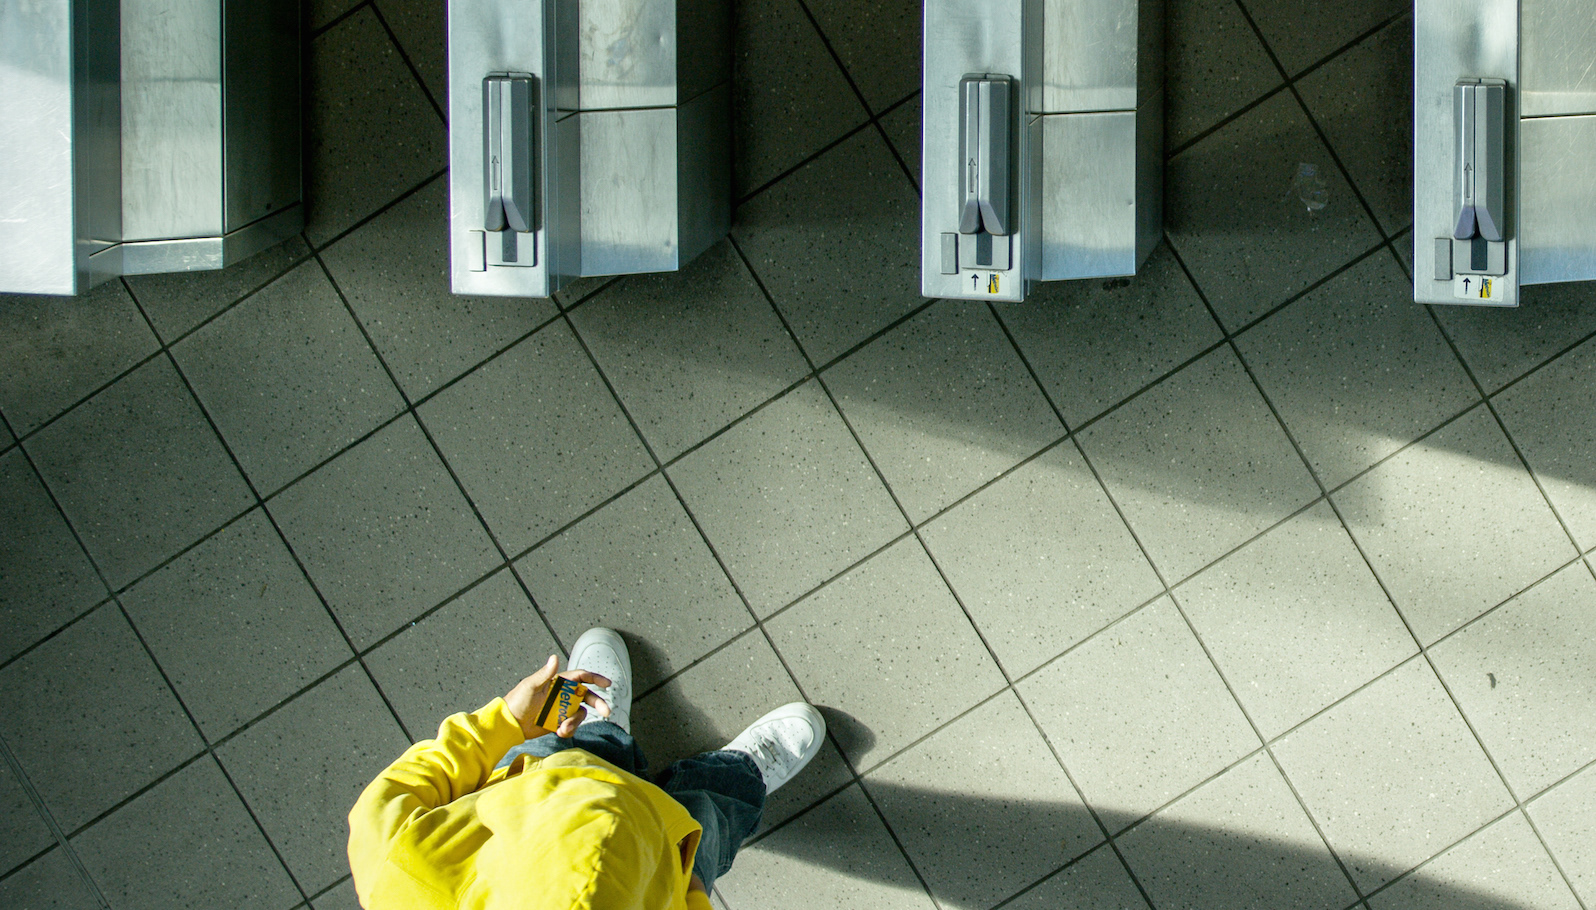 An overhead shot of a man in a yellow sweatshirt standing in front of subway turnstiles